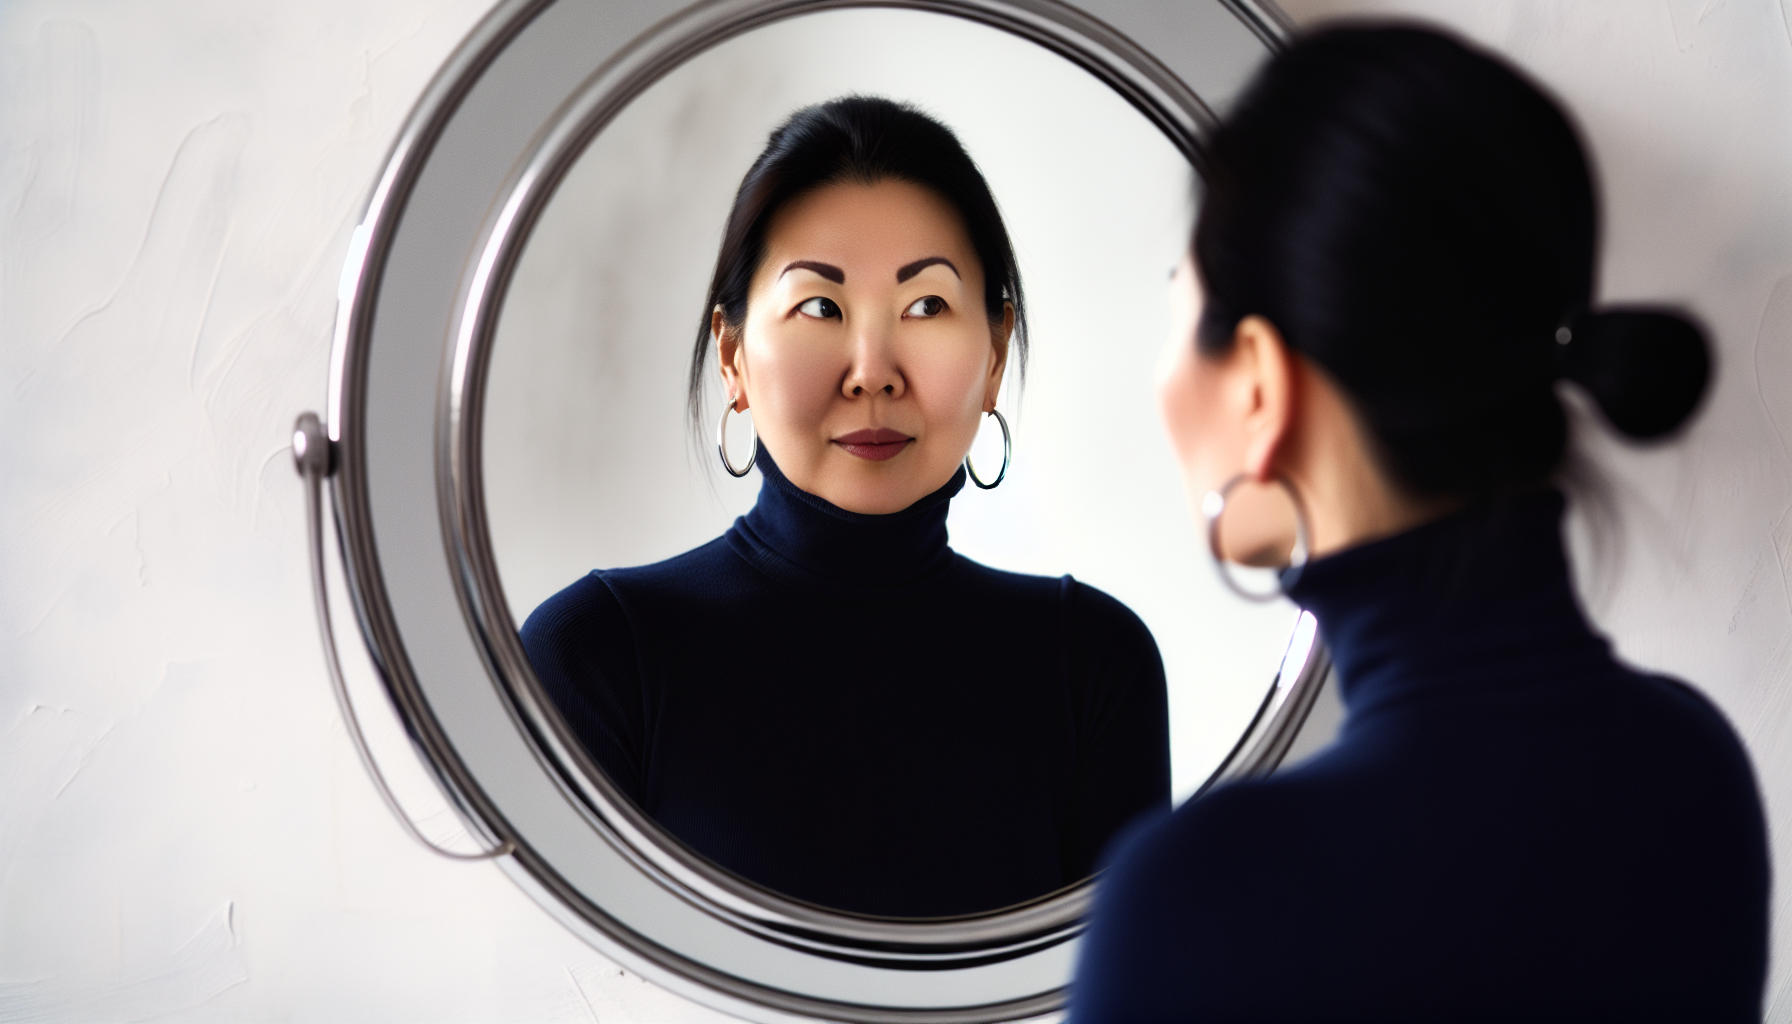 A person looking at a mirror with a confident expression, reflecting self-esteem enhancement